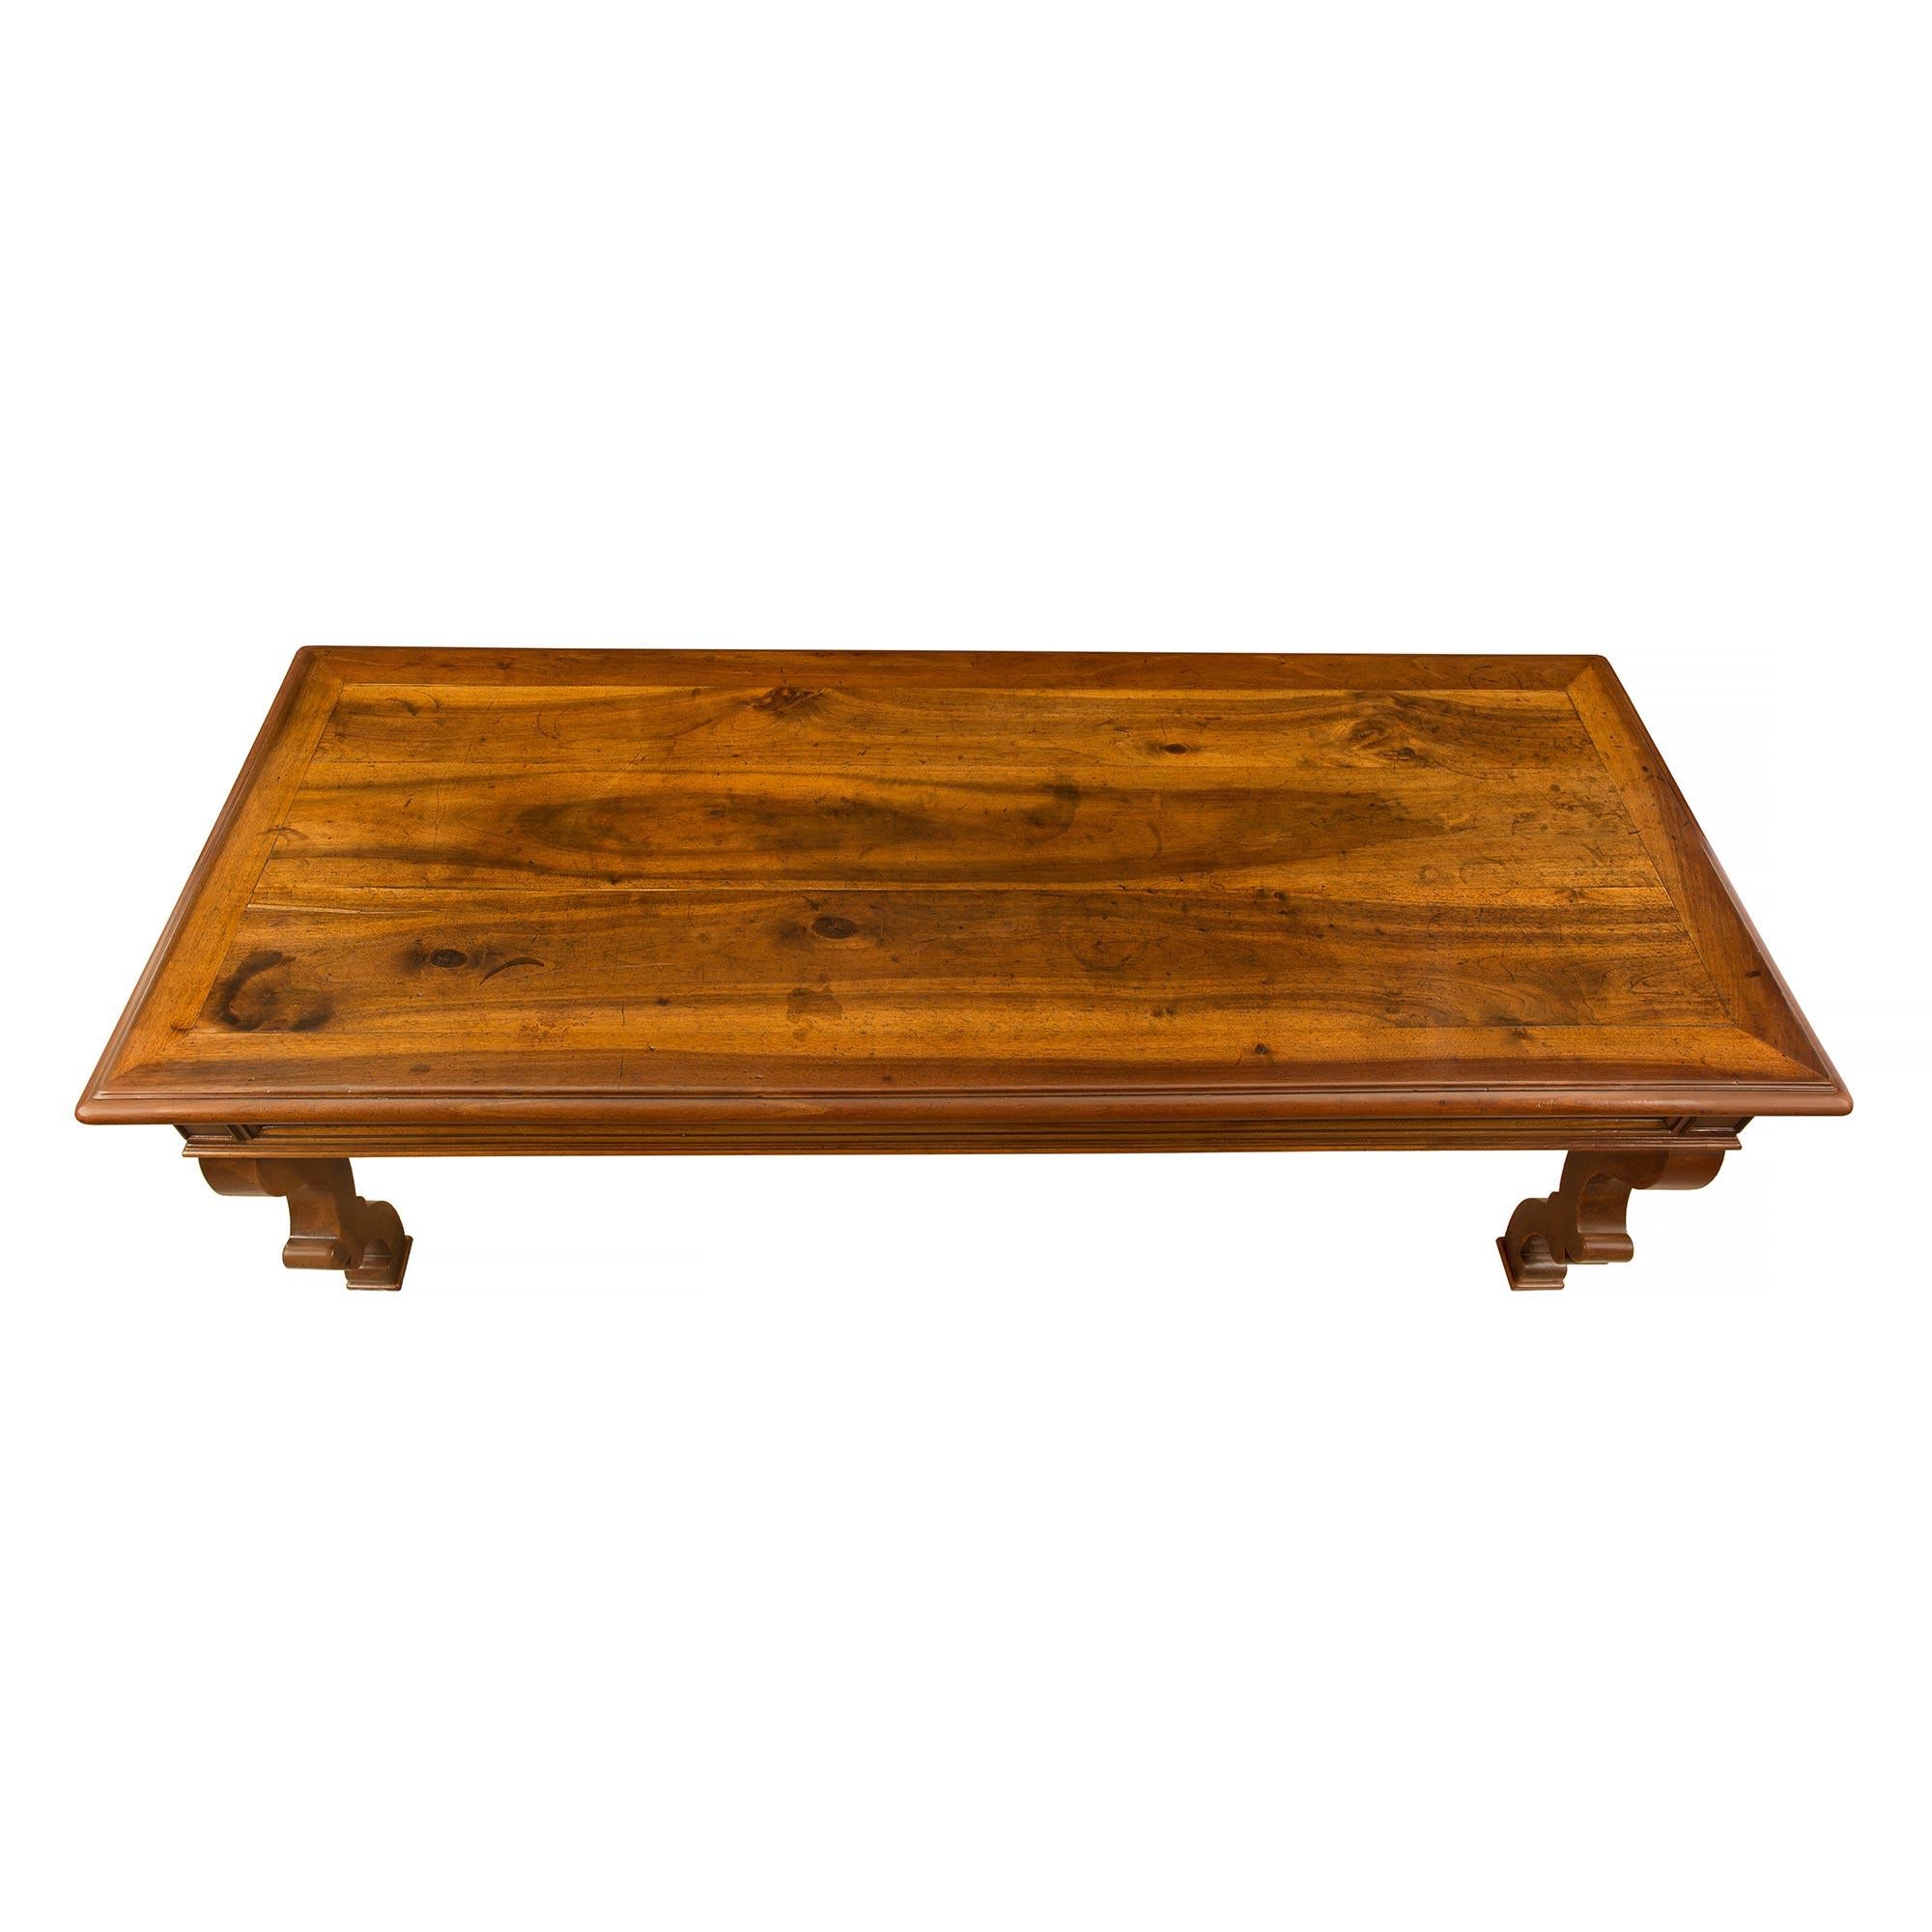 A very handsome rectangular 18th century country French solid walnut center/dining table. The table is raised by 'S' scrolled legs. The frieze decorated with molded trim has two drawers one on each side with the original iron pulls. The top has a